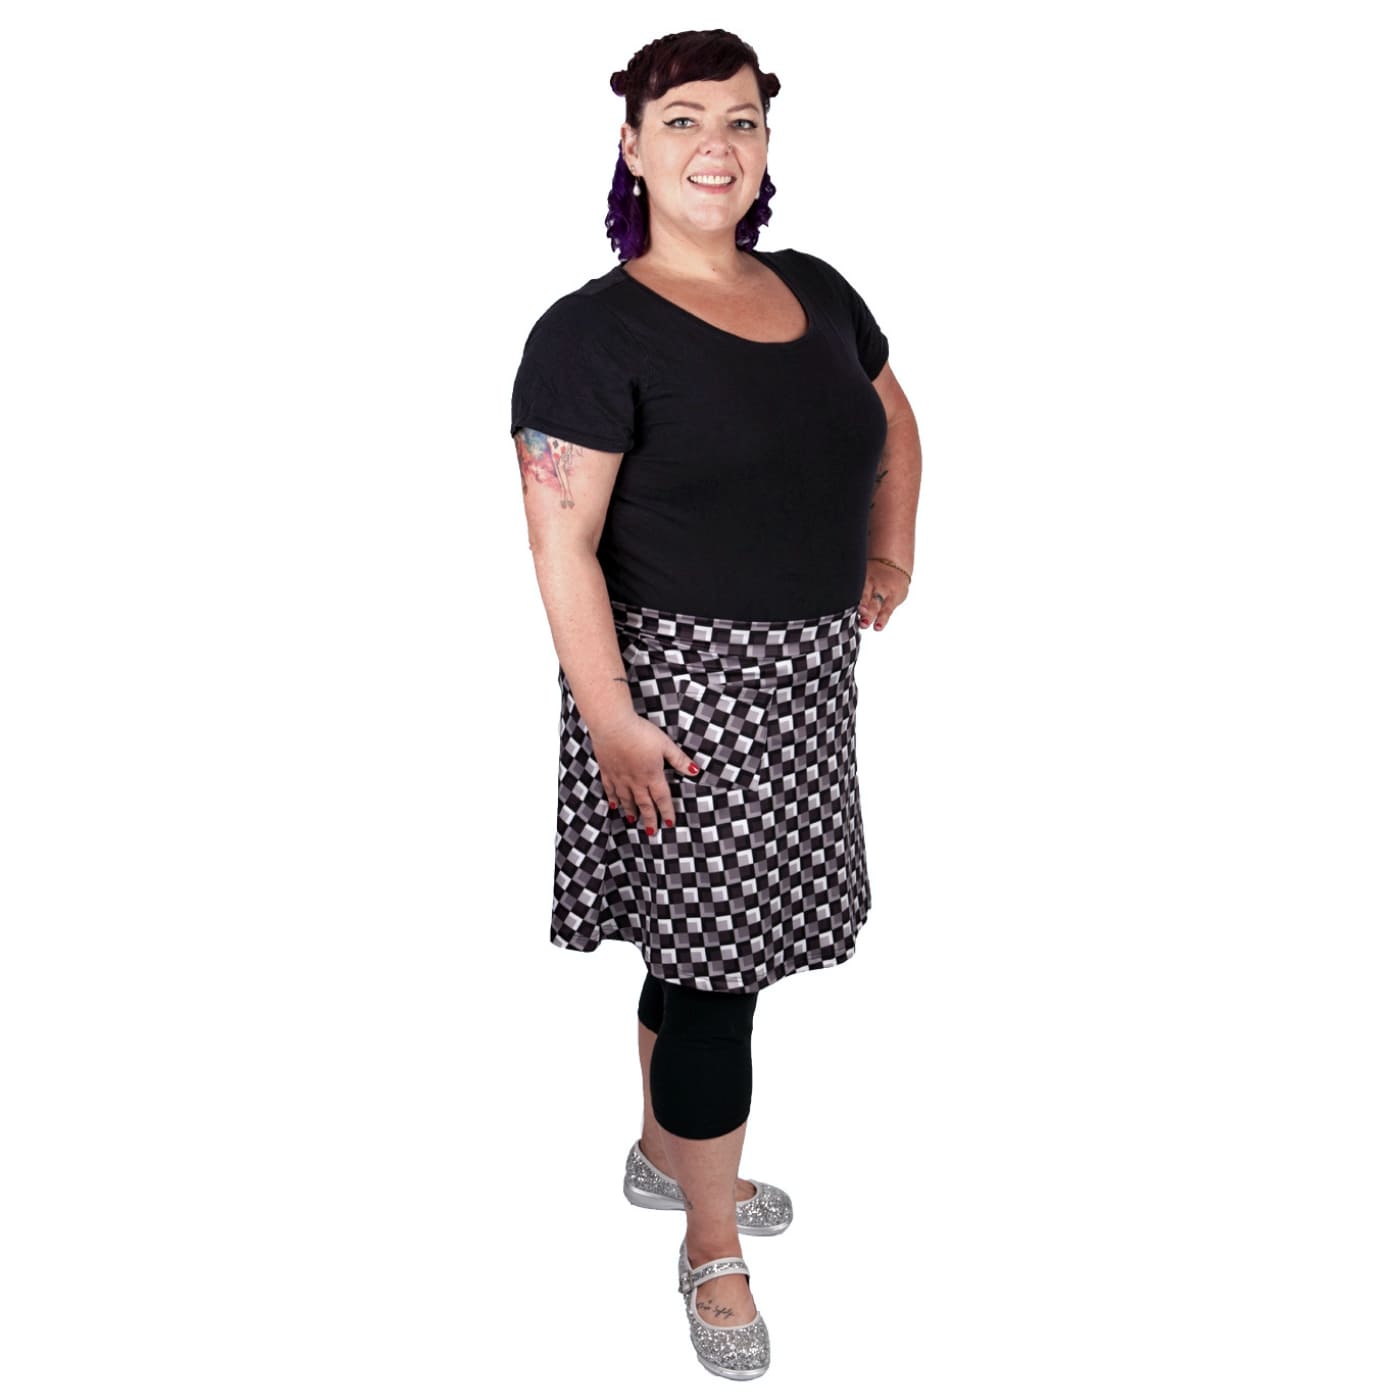 Too Square Short Skirt by RainbowsAndFairies.com.au (Check Print - Black - White - Grey - Kitsch - Aline Skirt With Pockets - Vintage Inspired) - SKU: CL_SHORT_TOOSQ_ORG - Pic-08